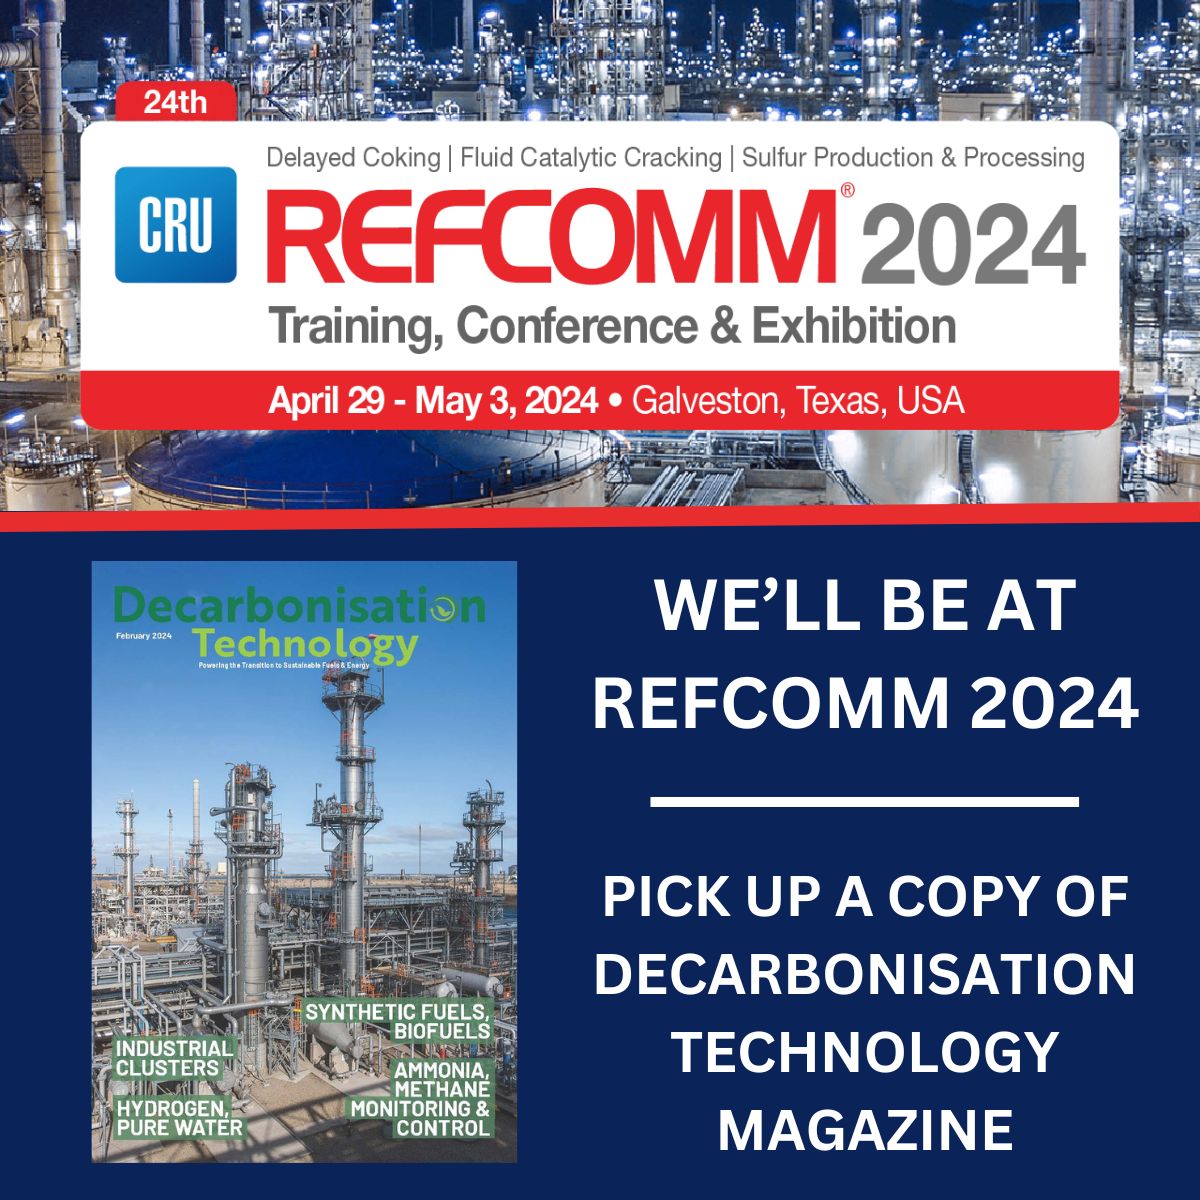 🛑If you are attending #RefComm in Galveston, Texas, next week hosted by @CRUGROUP, grab a copy, of Decarbonisation Technology magazine in the exhibition hall for all the latest in-depth and insightful articles on powering the transition to #sustainable fuels and energy. 🍃